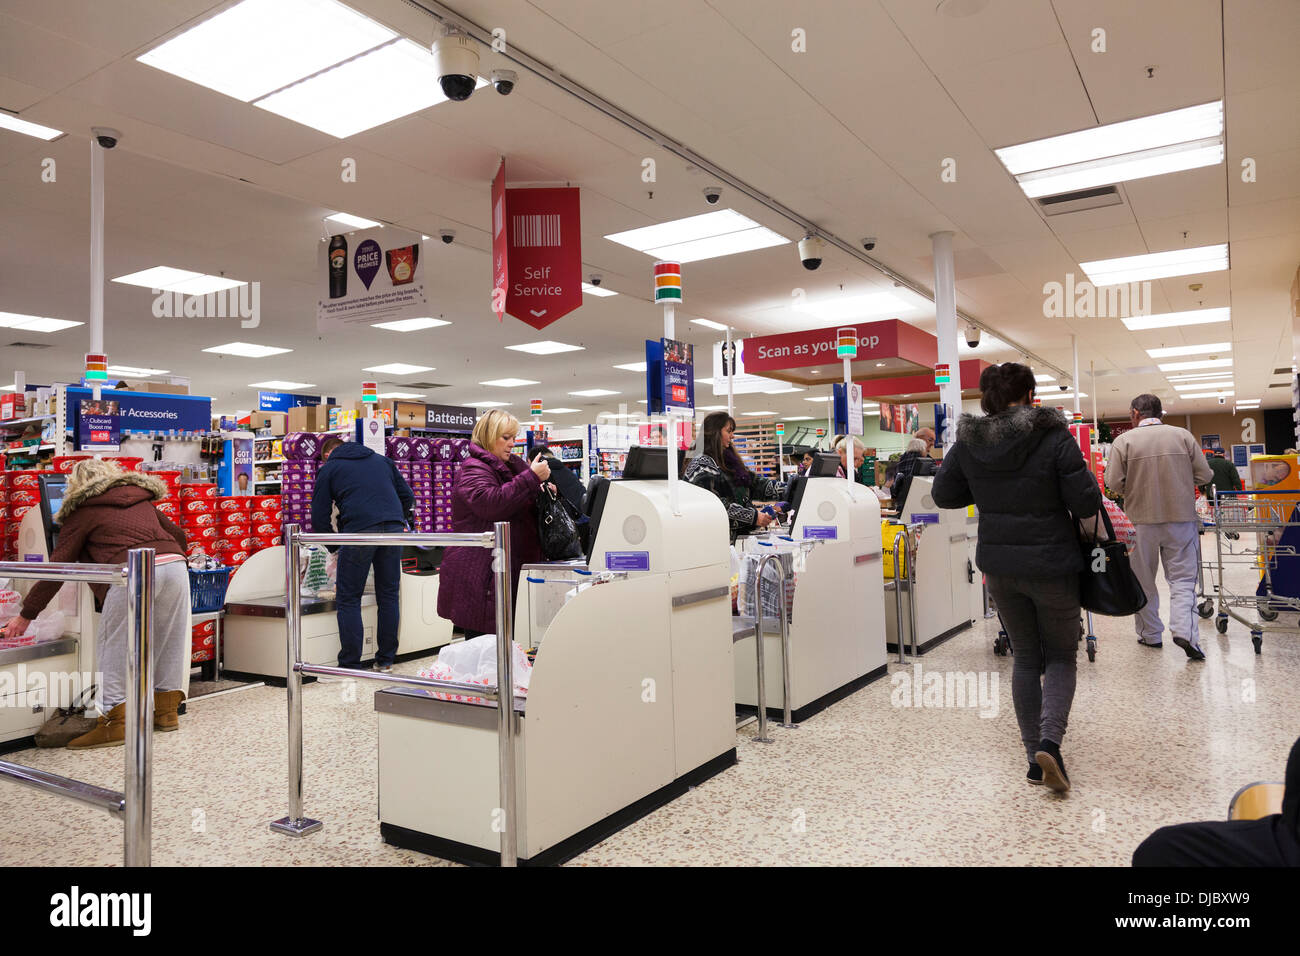 Customers passing through self-service check out area at Tesco Supermarket. Stock Photo